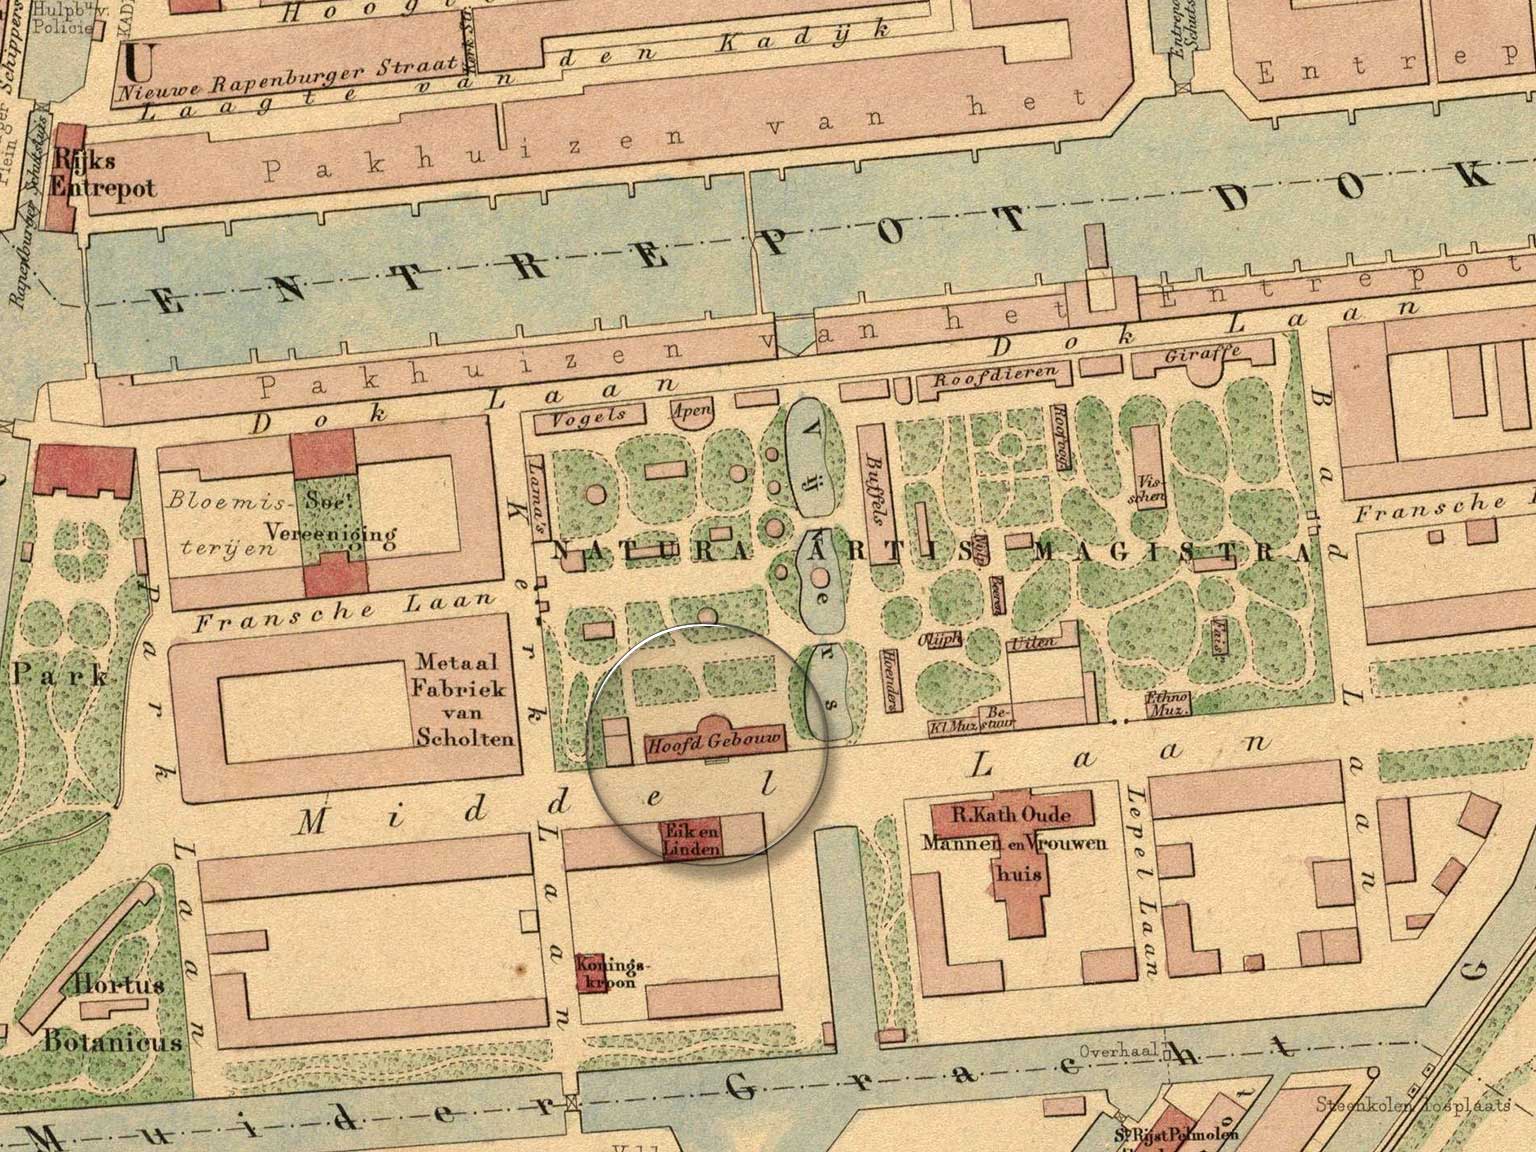 Groote Museum, Amsterdam, on a map from 1867